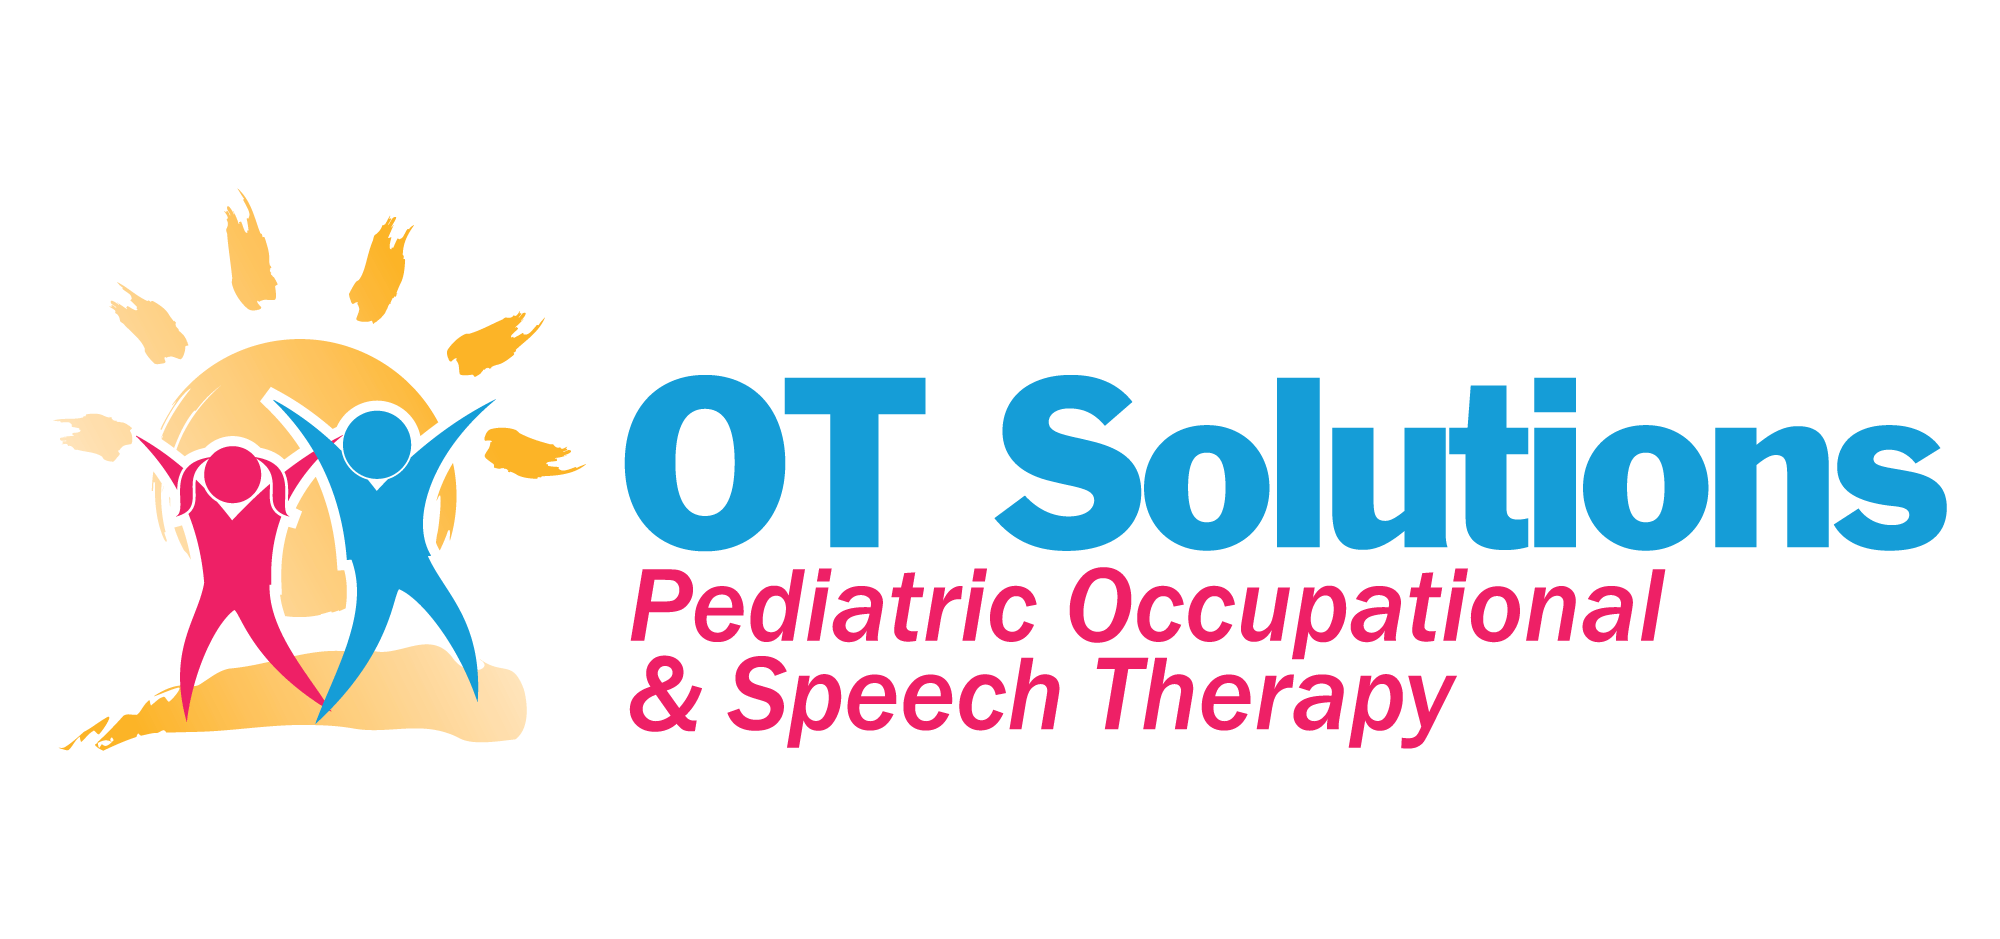 Pediatric Occupational and Speech Therapy Practice